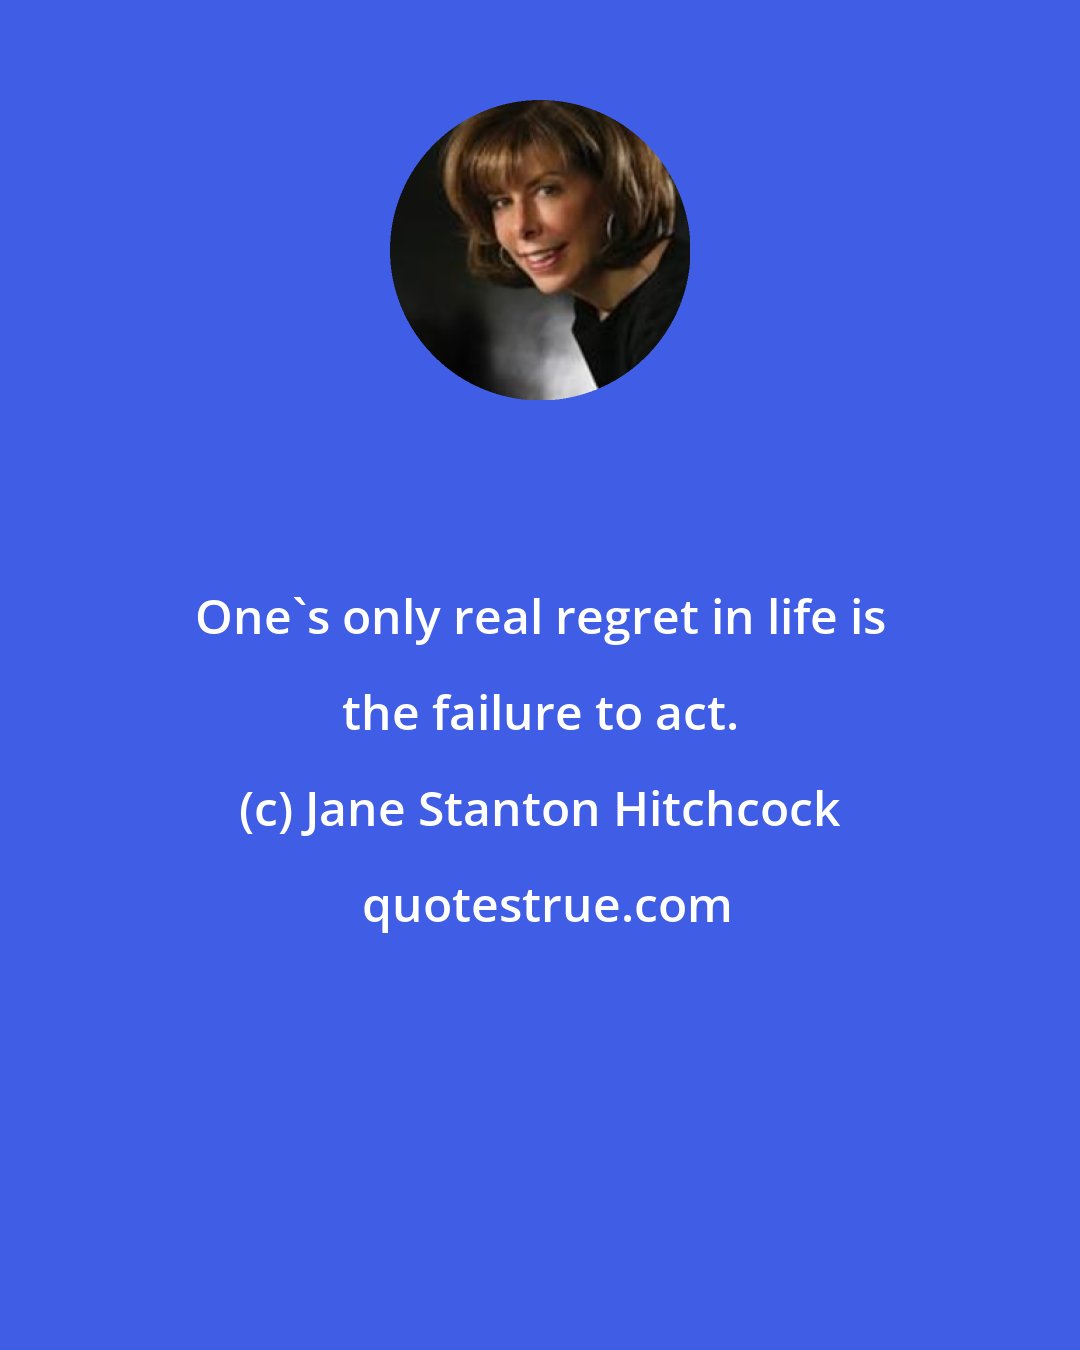 Jane Stanton Hitchcock: One's only real regret in life is the failure to act.